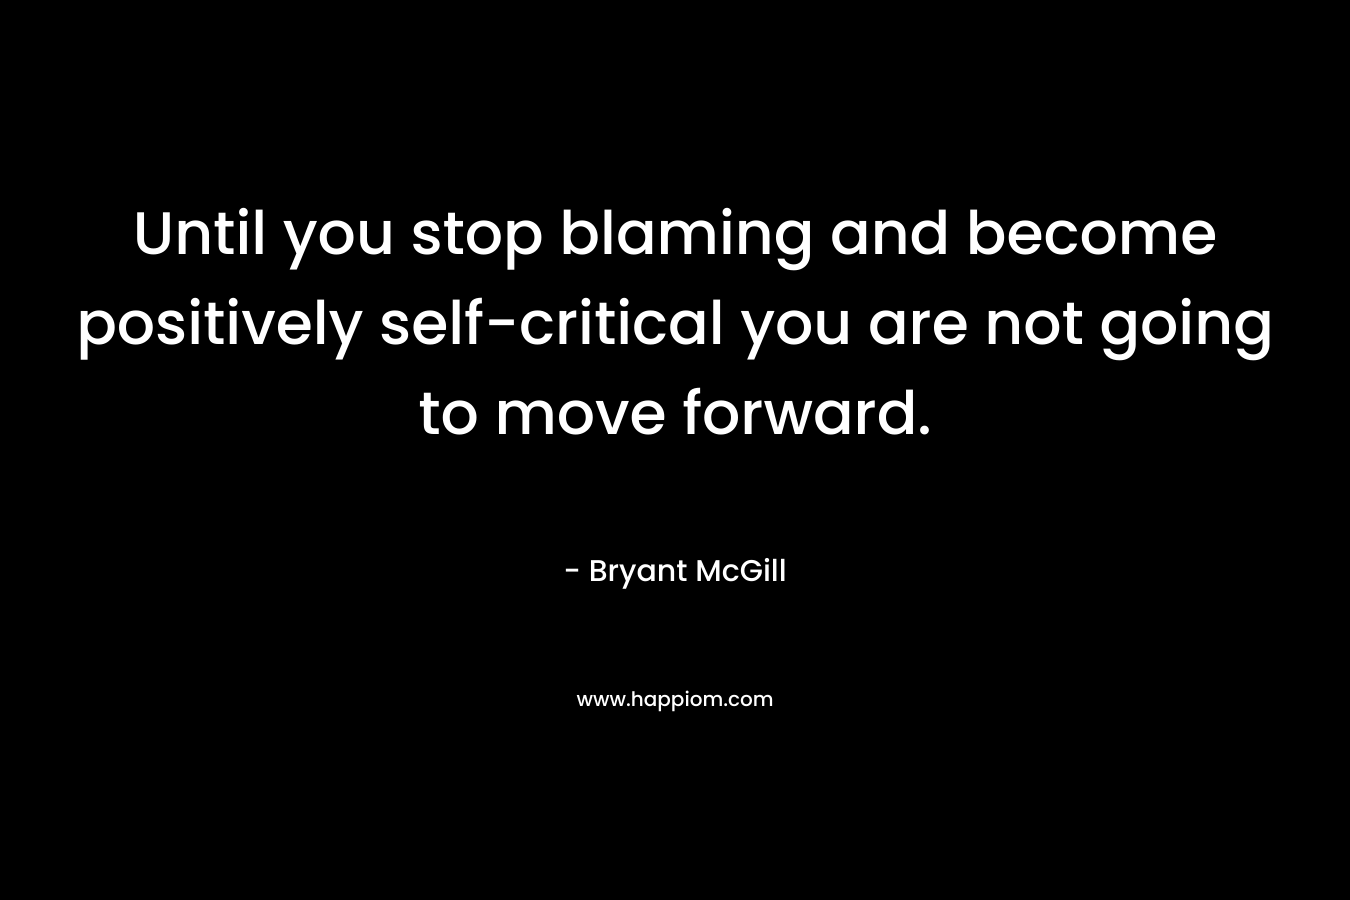 Until you stop blaming and become positively self-critical you are not going to move forward.